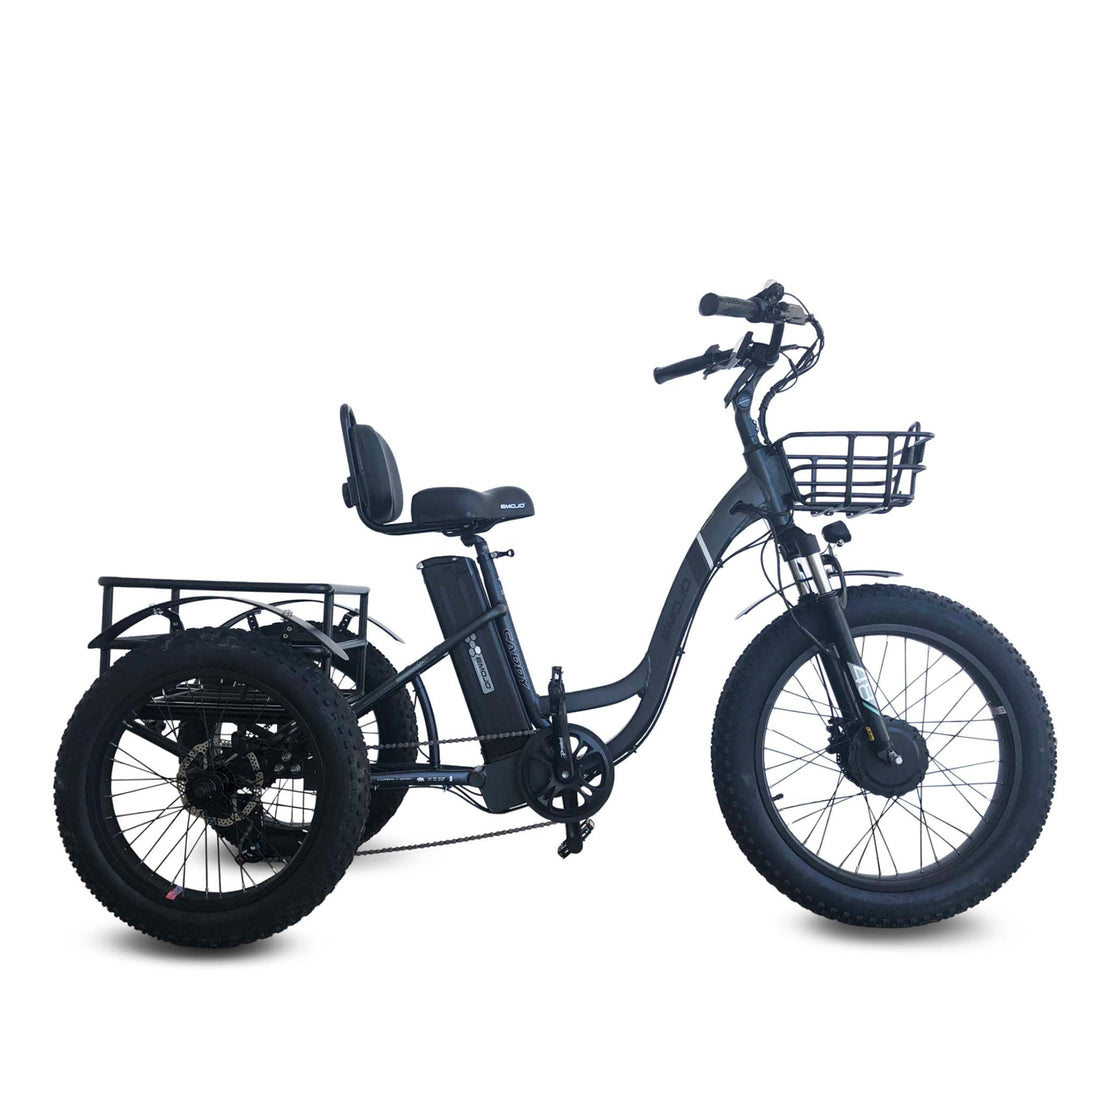 EMOJO CADDY PRO ELECTRIC TRICYCLE